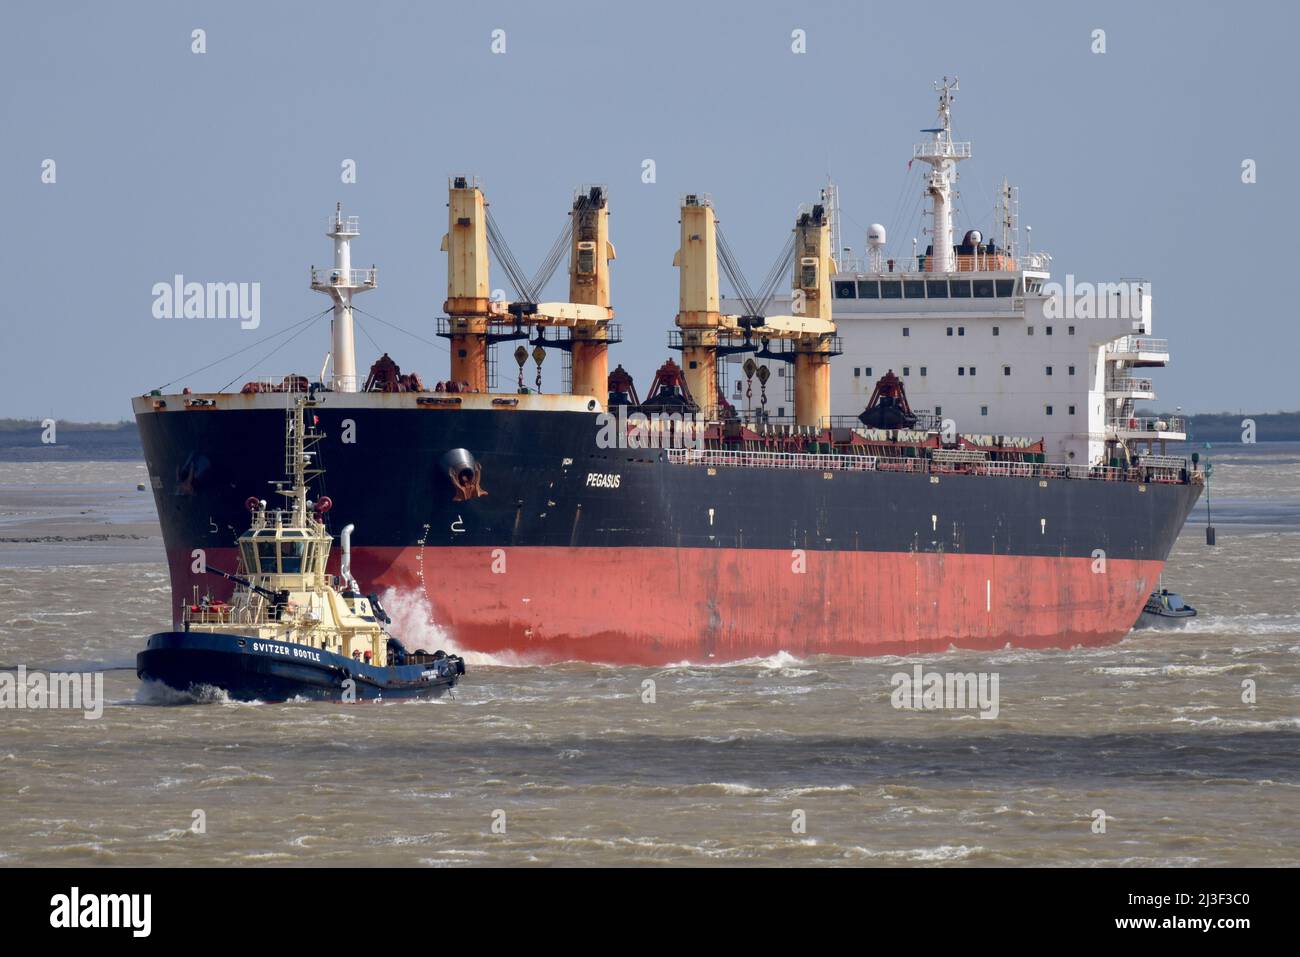 Gravesend UK Strong winds whip up the waves on the River Thames as ships and boats ply their trade on the Liquid Highway. Stock Photo